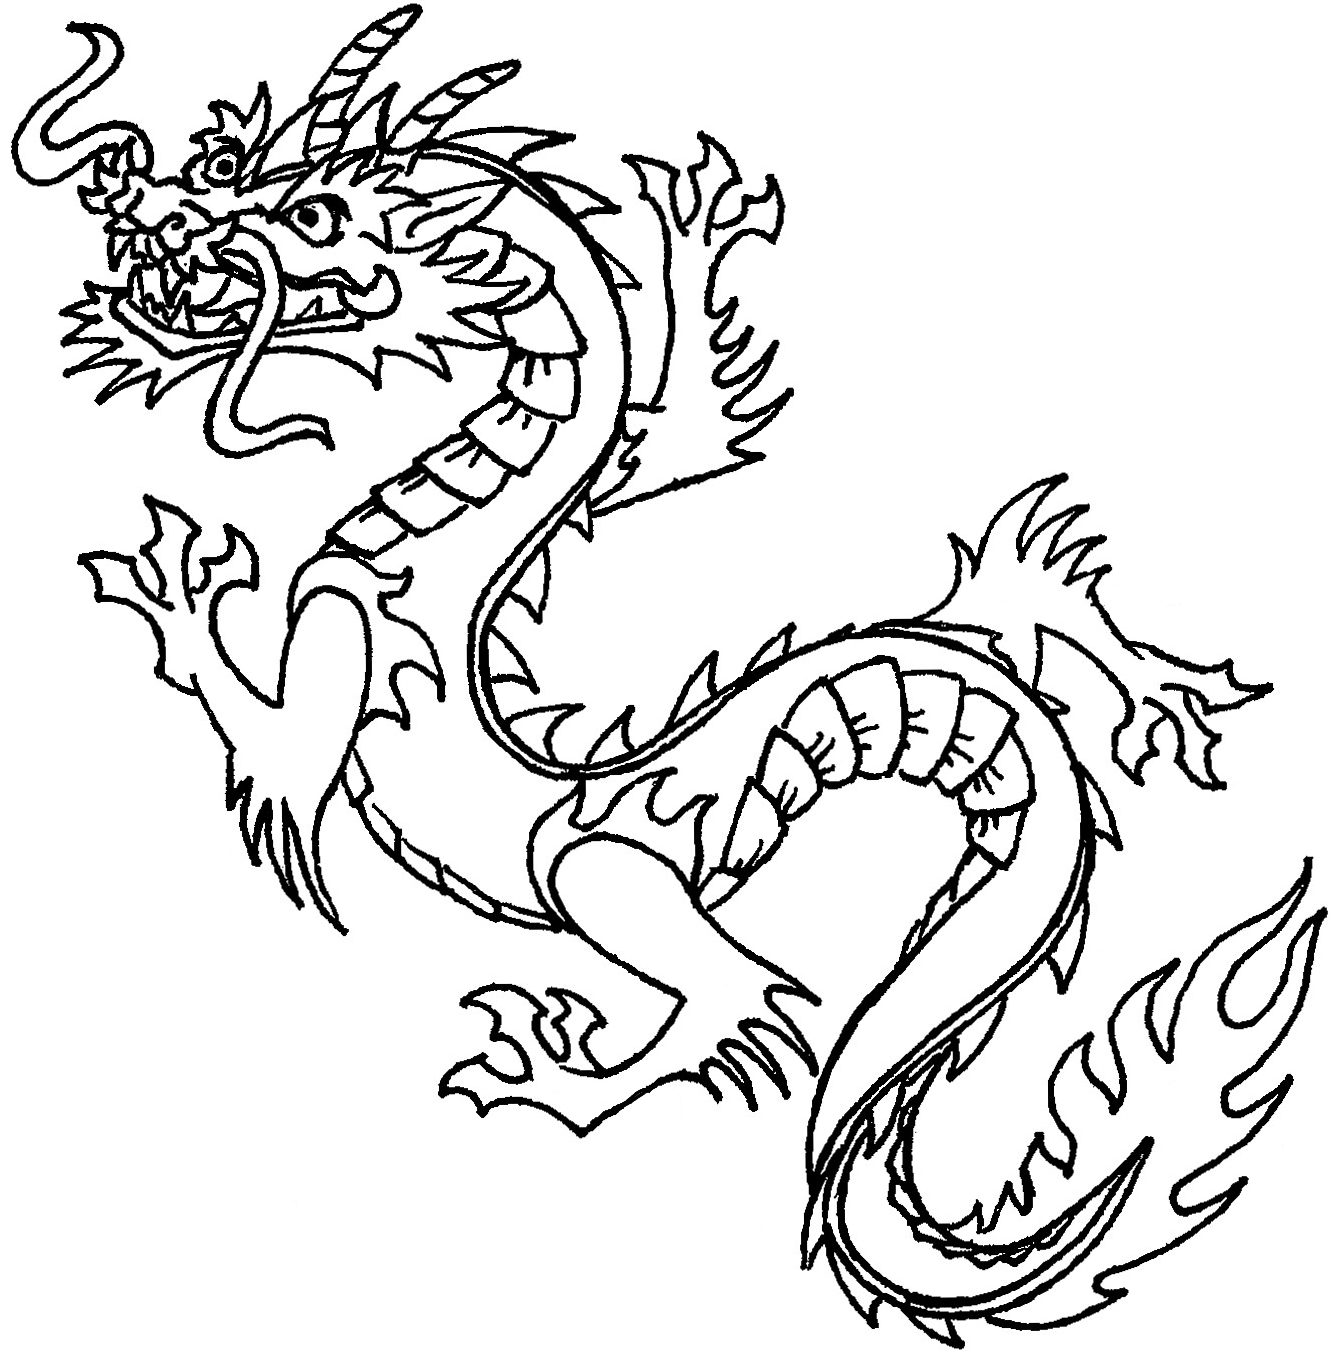 Easy Dragon Drawings Black And White - ClipArt Best